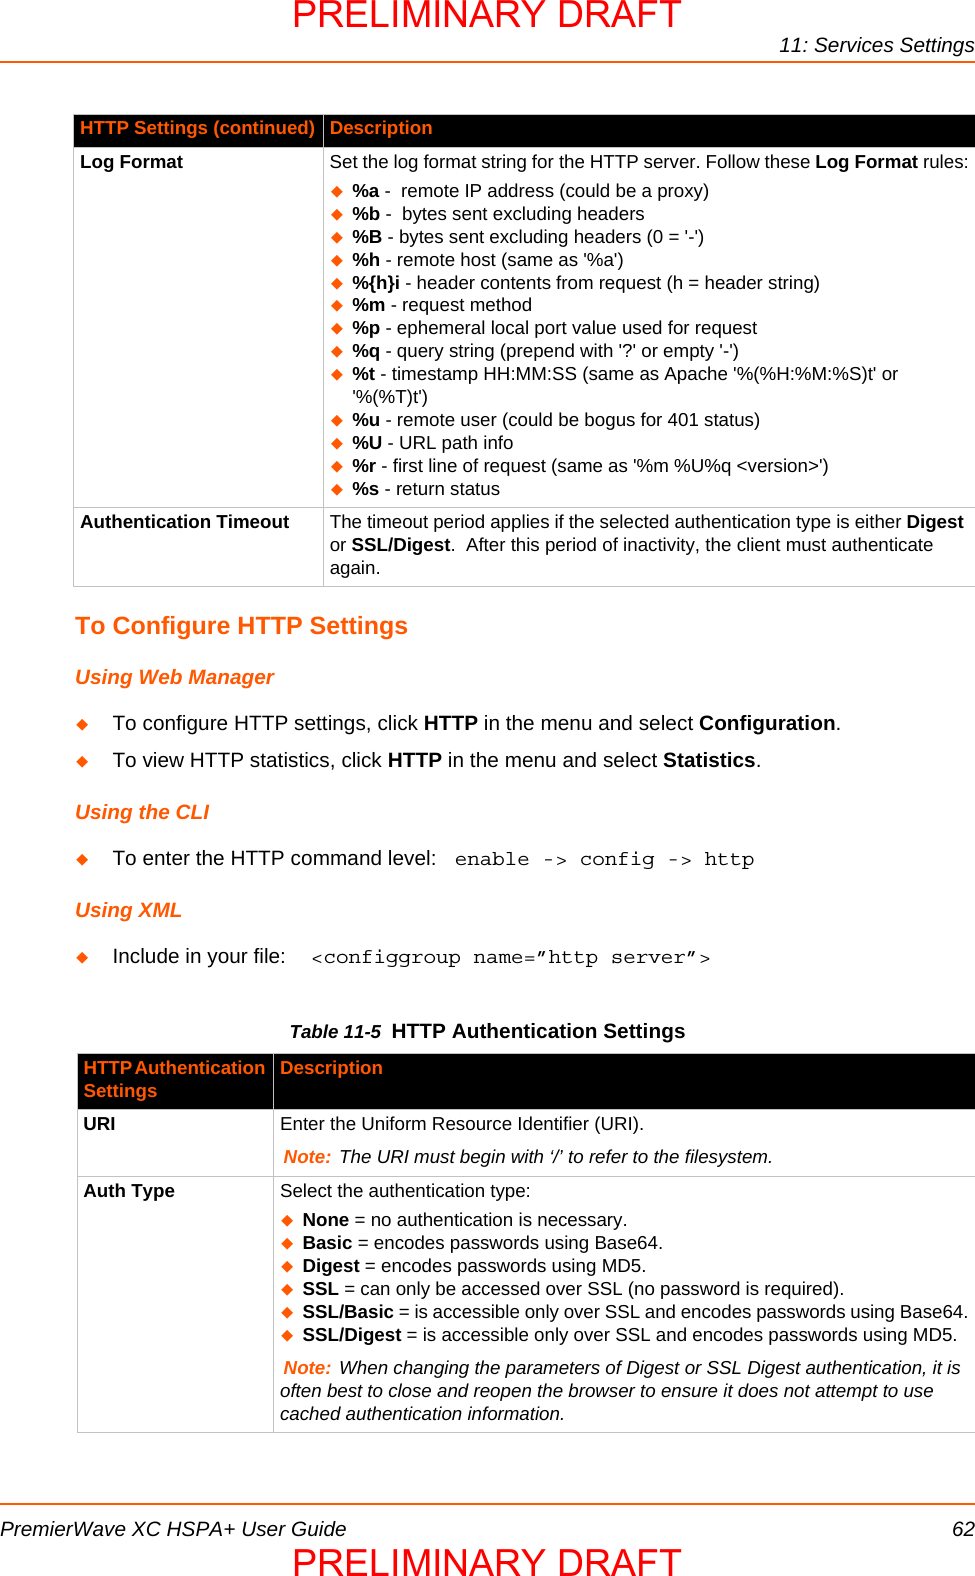 11: Services SettingsPremierWave XC HSPA+ User Guide 62To Configure HTTP SettingsUsing Web ManagerTo configure HTTP settings, click HTTP in the menu and select Configuration.To view HTTP statistics, click HTTP in the menu and select Statistics.Using the CLITo enter the HTTP command level:  enable -&gt; config -&gt; httpUsing XMLInclude in your file:  &lt;configgroup name=”http server”&gt;Table 11-5  HTTP Authentication SettingsLog Format Set the log format string for the HTTP server. Follow these Log Format rules:%a -  remote IP address (could be a proxy) %b -  bytes sent excluding headers %B - bytes sent excluding headers (0 = &apos;-&apos;) %h - remote host (same as &apos;%a&apos;) %{h}i - header contents from request (h = header string) %m - request method %p - ephemeral local port value used for request %q - query string (prepend with &apos;?&apos; or empty &apos;-&apos;) %t - timestamp HH:MM:SS (same as Apache &apos;%(%H:%M:%S)t&apos; or &apos;%(%T)t&apos;) %u - remote user (could be bogus for 401 status) %U - URL path info %r - first line of request (same as &apos;%m %U%q &lt;version&gt;&apos;) %s - return statusAuthentication Timeout The timeout period applies if the selected authentication type is either Digest or SSL/Digest.  After this period of inactivity, the client must authenticate again.HTTP Authentication Settings DescriptionURI Enter the Uniform Resource Identifier (URI).Note: The URI must begin with ‘/’ to refer to the filesystem.Auth Type Select the authentication type: None = no authentication is necessary. Basic = encodes passwords using Base64. Digest = encodes passwords using MD5. SSL = can only be accessed over SSL (no password is required).SSL/Basic = is accessible only over SSL and encodes passwords using Base64.SSL/Digest = is accessible only over SSL and encodes passwords using MD5.Note: When changing the parameters of Digest or SSL Digest authentication, it is often best to close and reopen the browser to ensure it does not attempt to use cached authentication information.HTTP Settings (continued) DescriptionPRELIMINARY DRAFTPRELIMINARY DRAFT